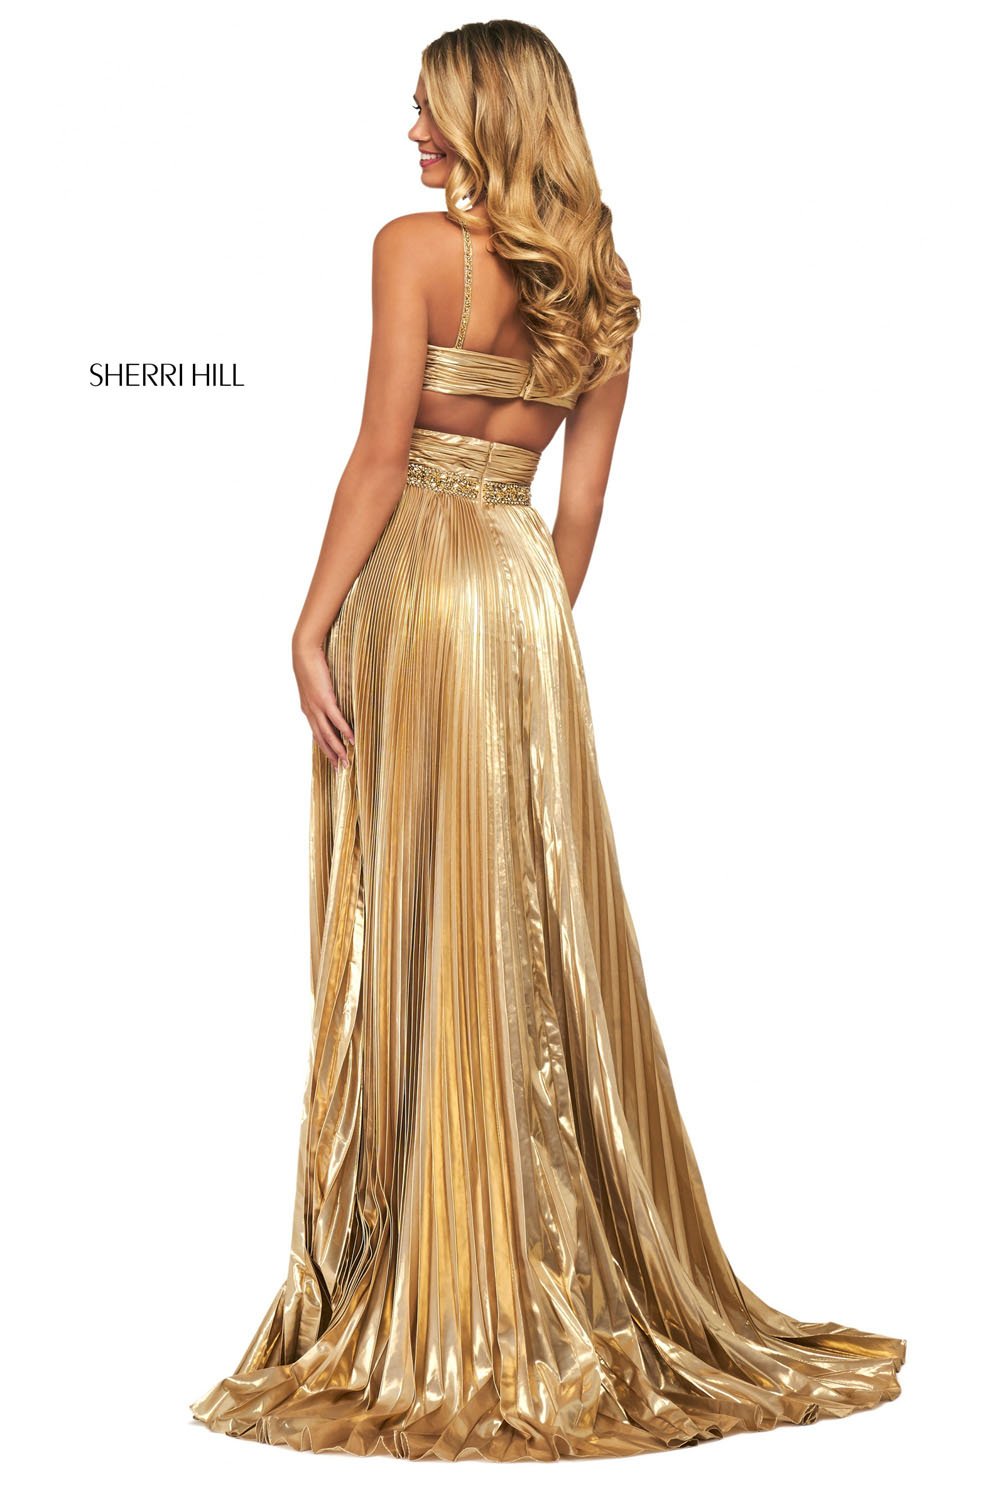 Sherri Hill 53738 dress images in these colors: Gold.